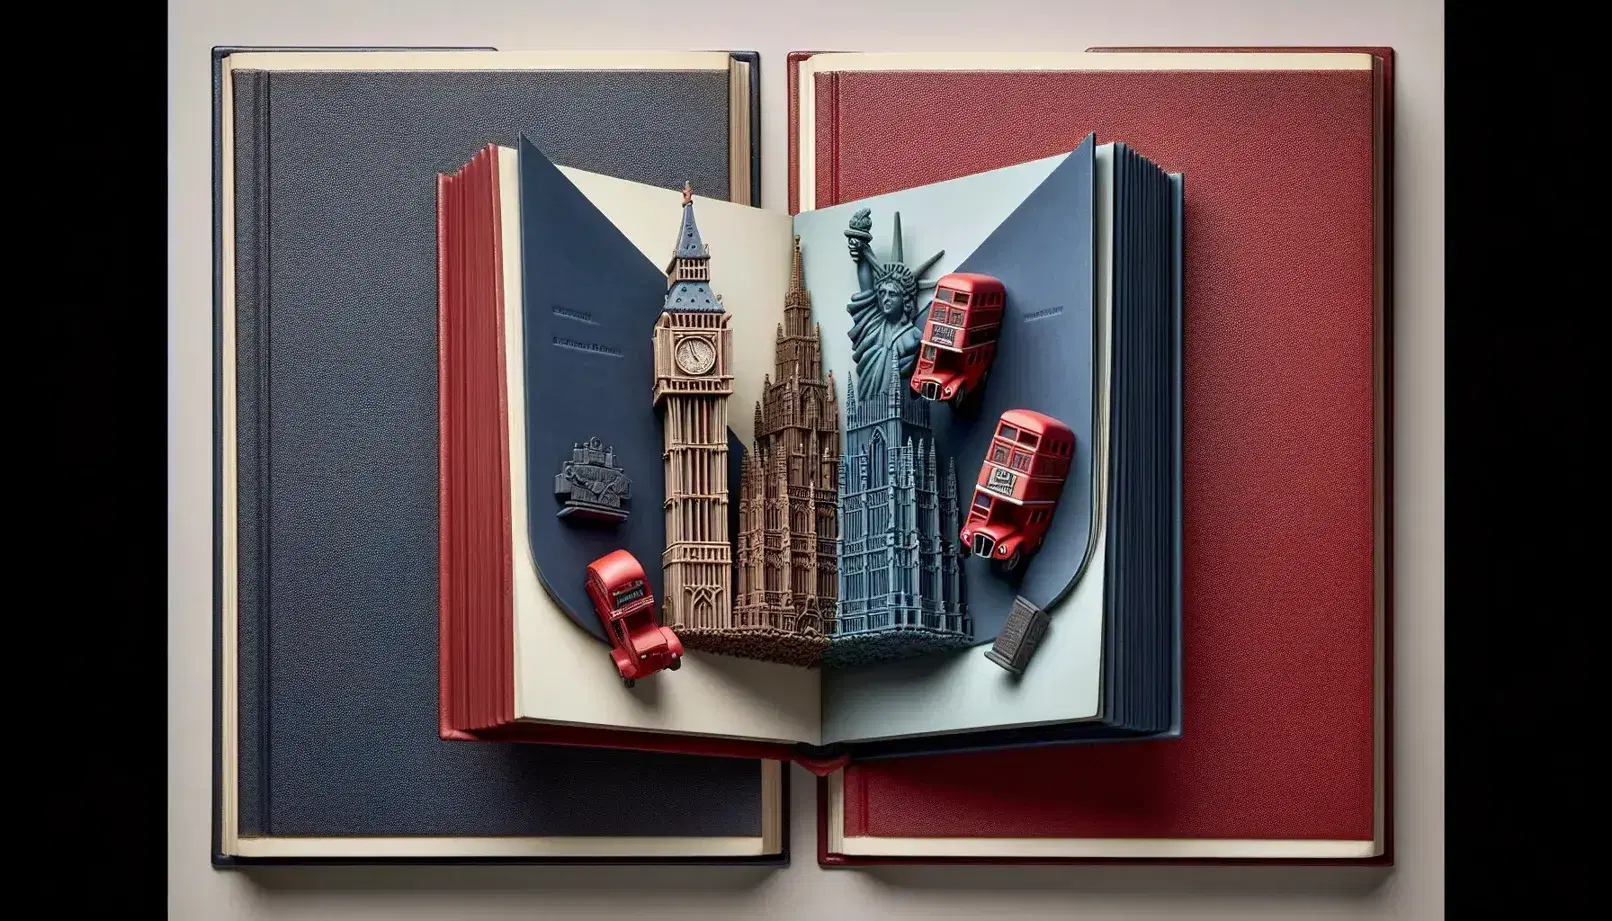 Two hardcover books form a V shape with a Big Ben model nestled between them, flanked by a red bus on the left and the Statue of Liberty on the right.